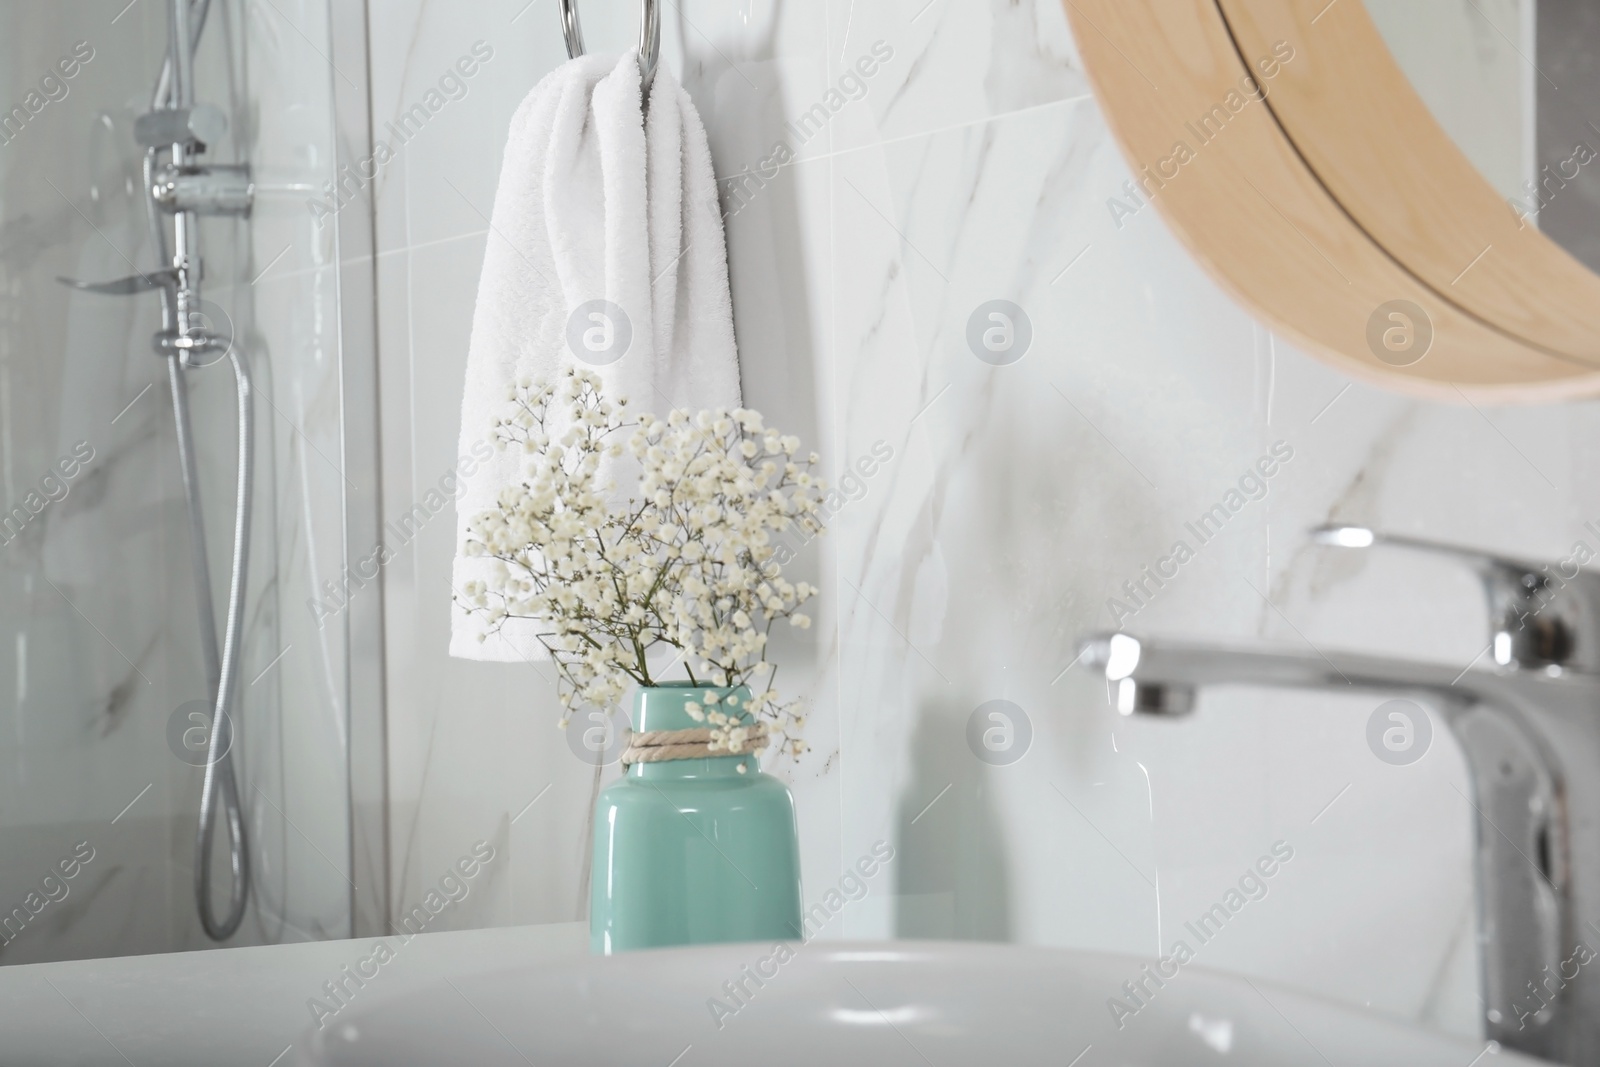 Photo of Vase with flowers and soft towel in bathroom interior